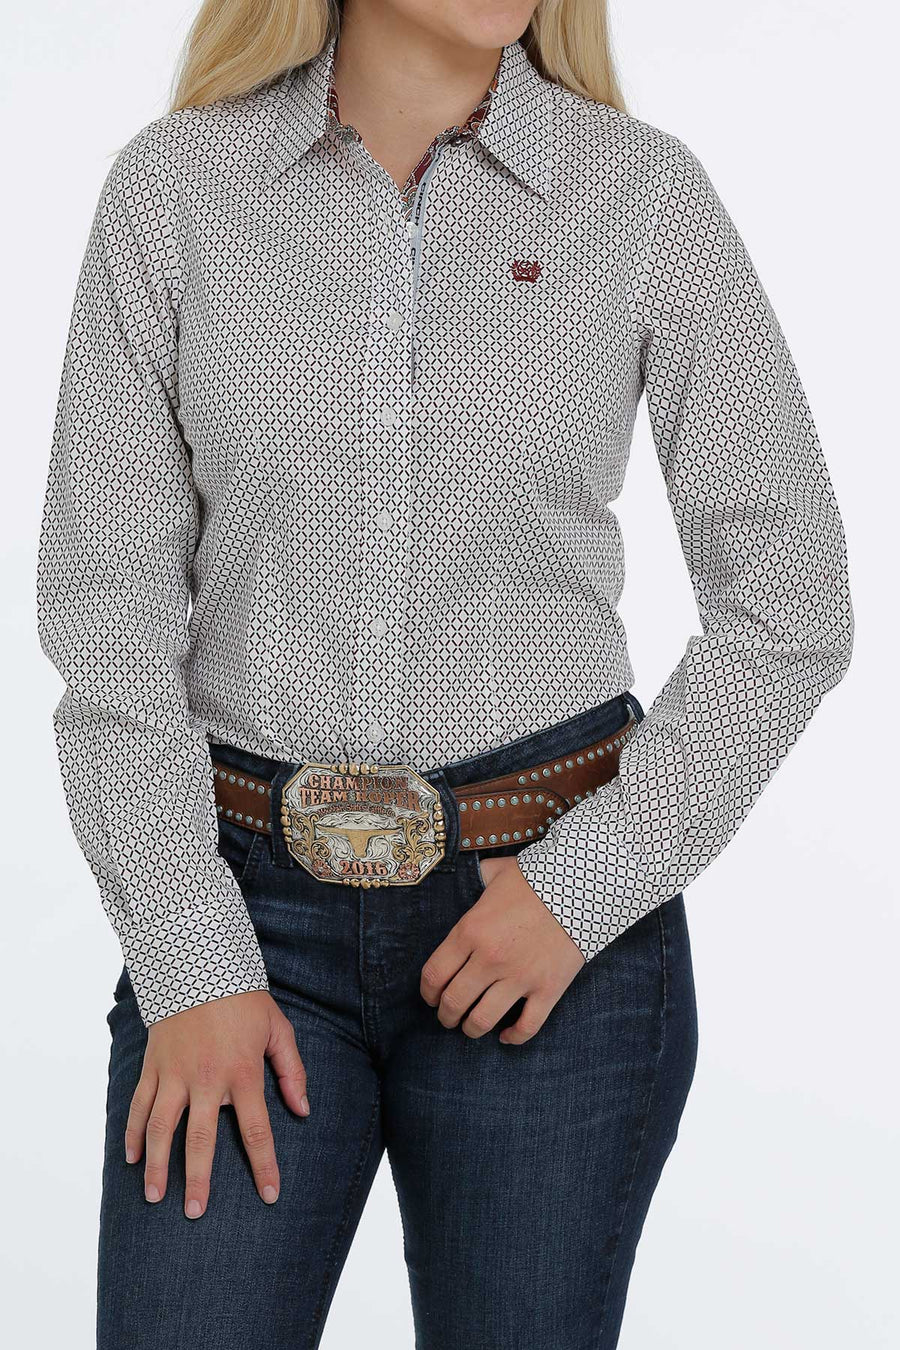 Cinch Women’s Arena Ready White/Red Shirt